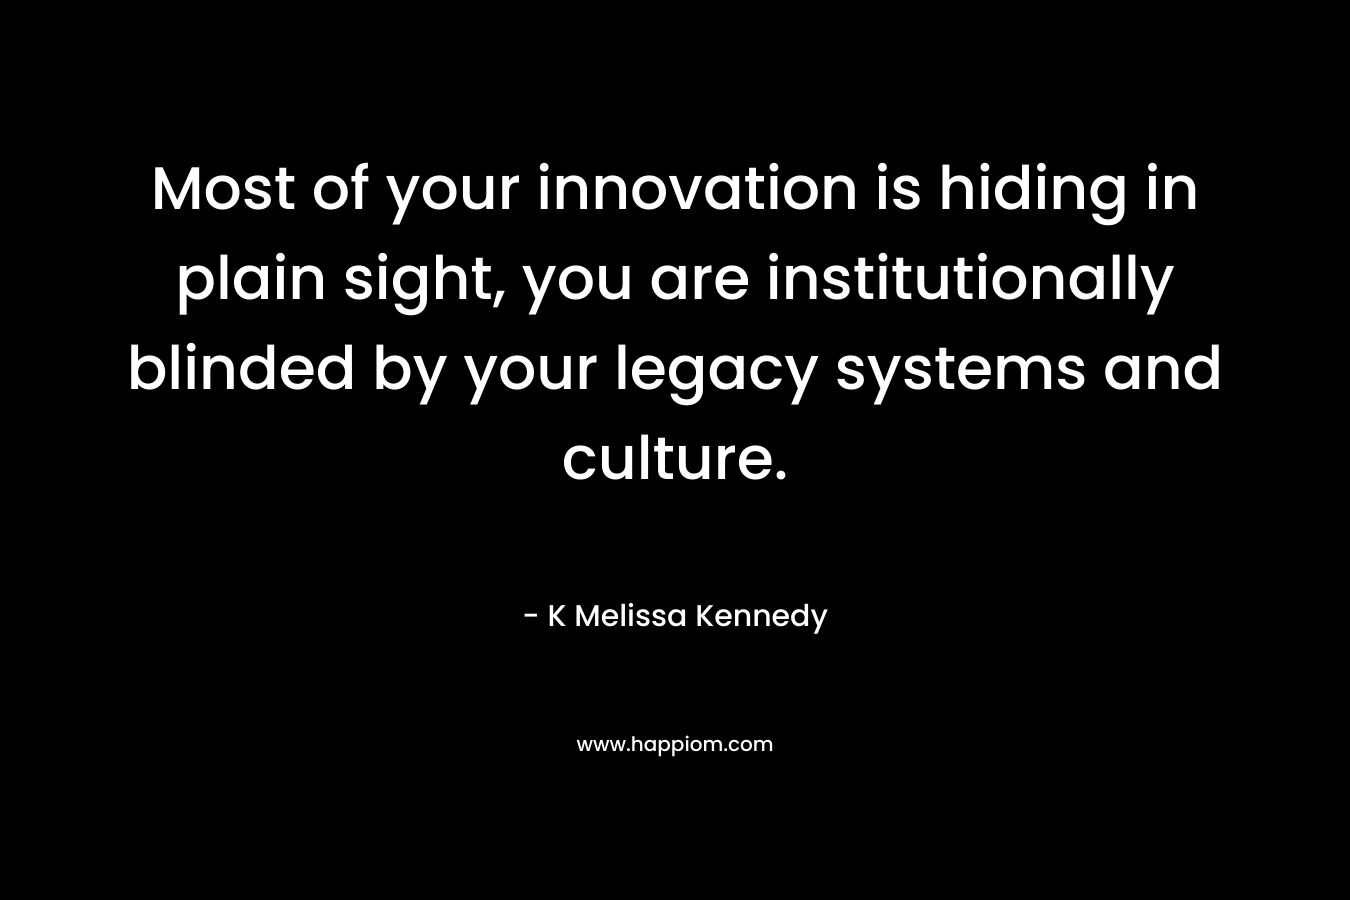 Most of your innovation is hiding in plain sight, you are institutionally blinded by your legacy systems and culture. – K Melissa Kennedy